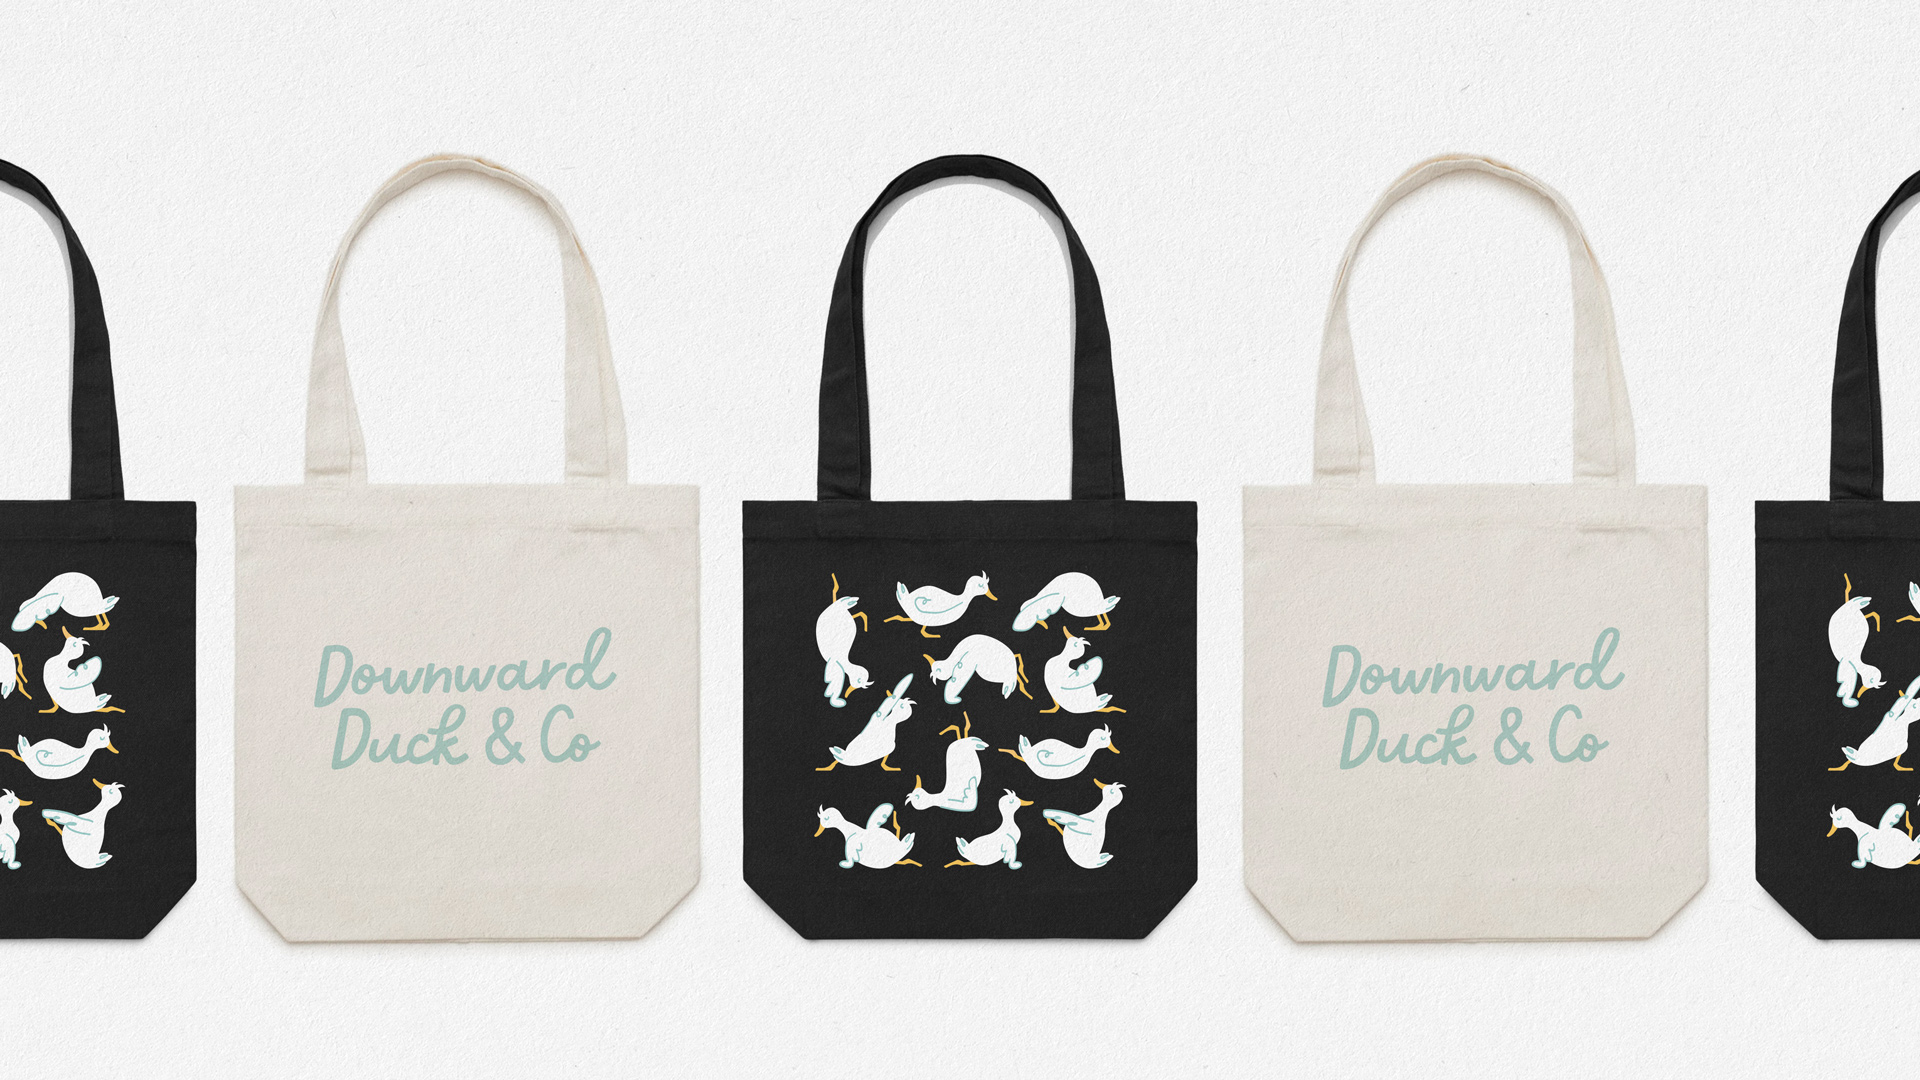 Downward Duck & Co tote bag design in black and white.